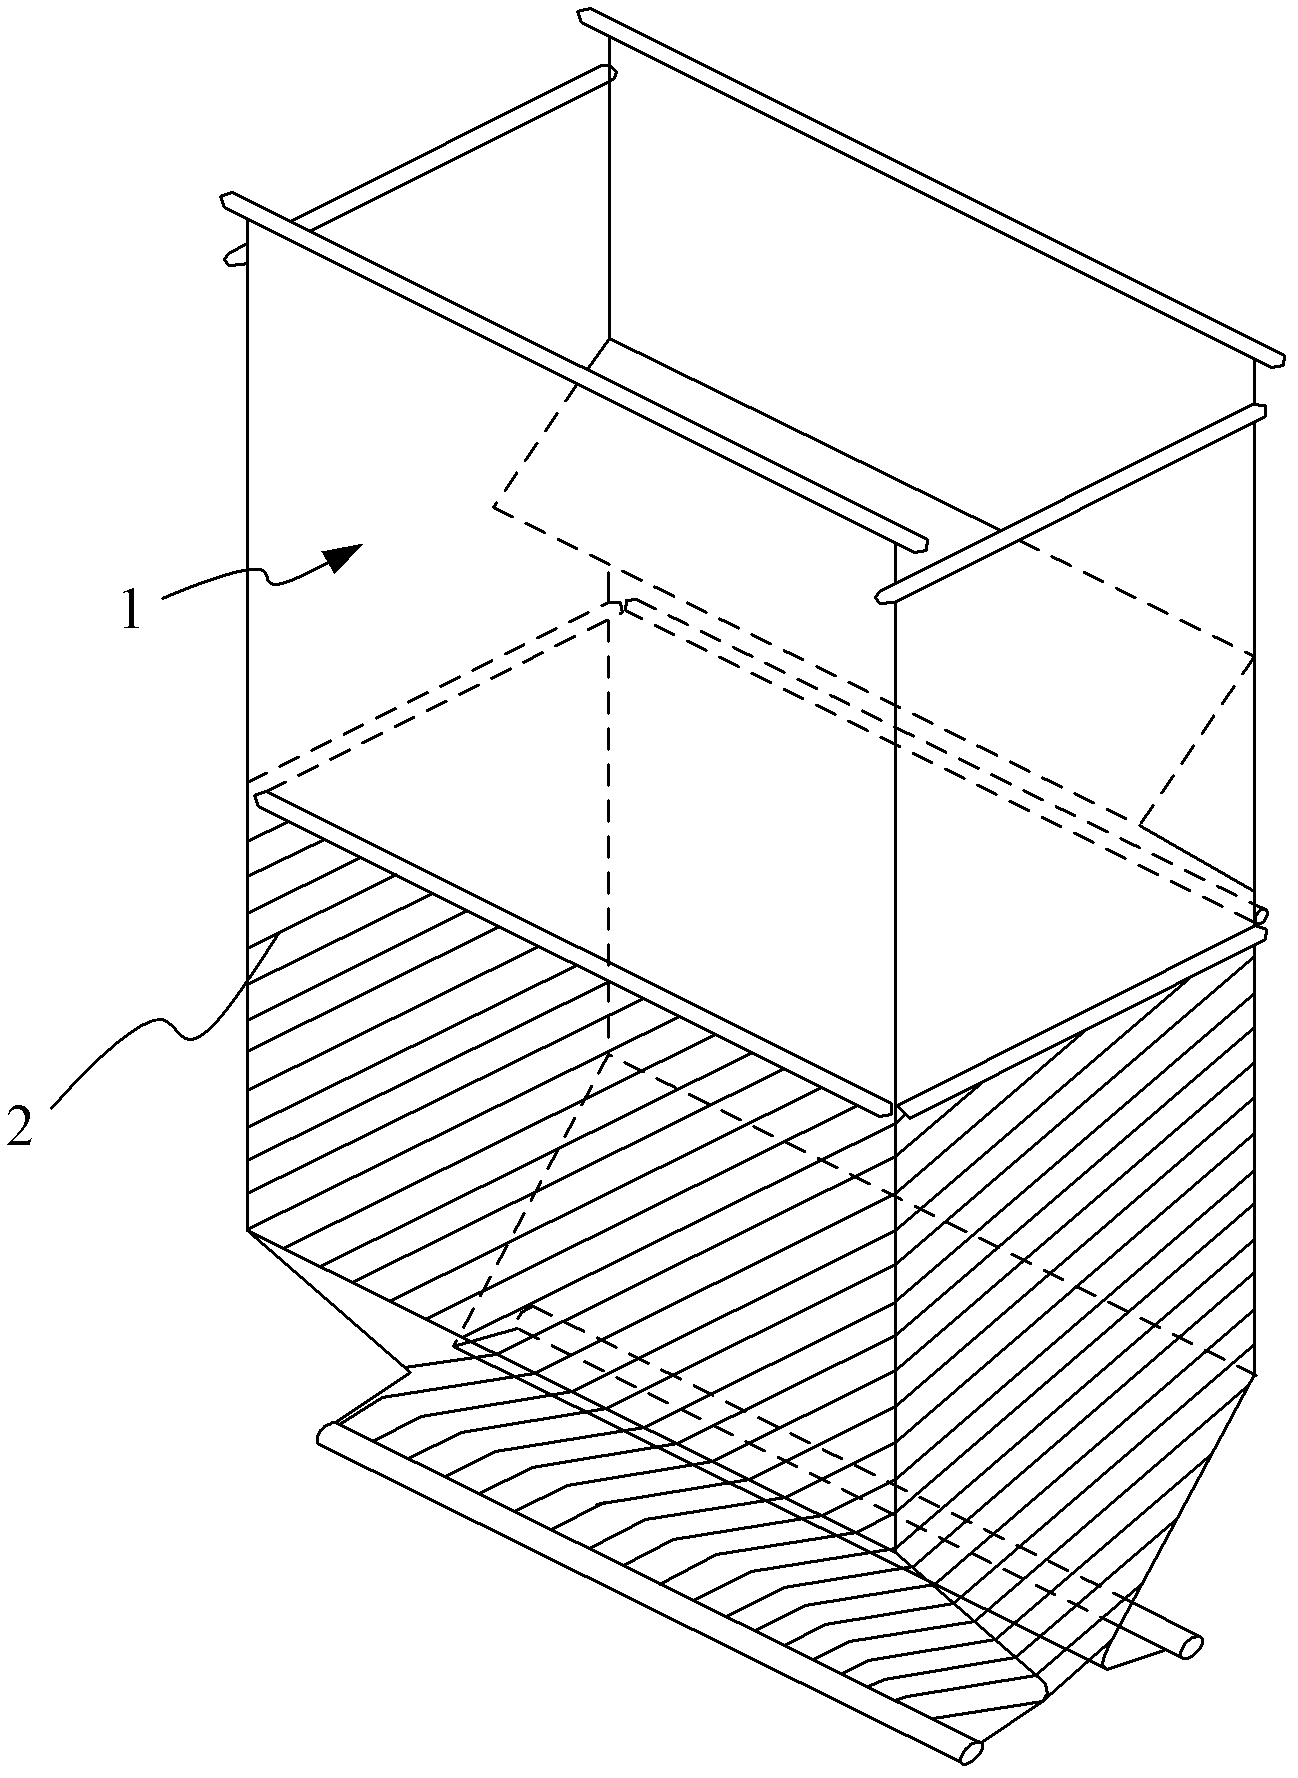 Boiler comprising water cooling system for variable-section hearth